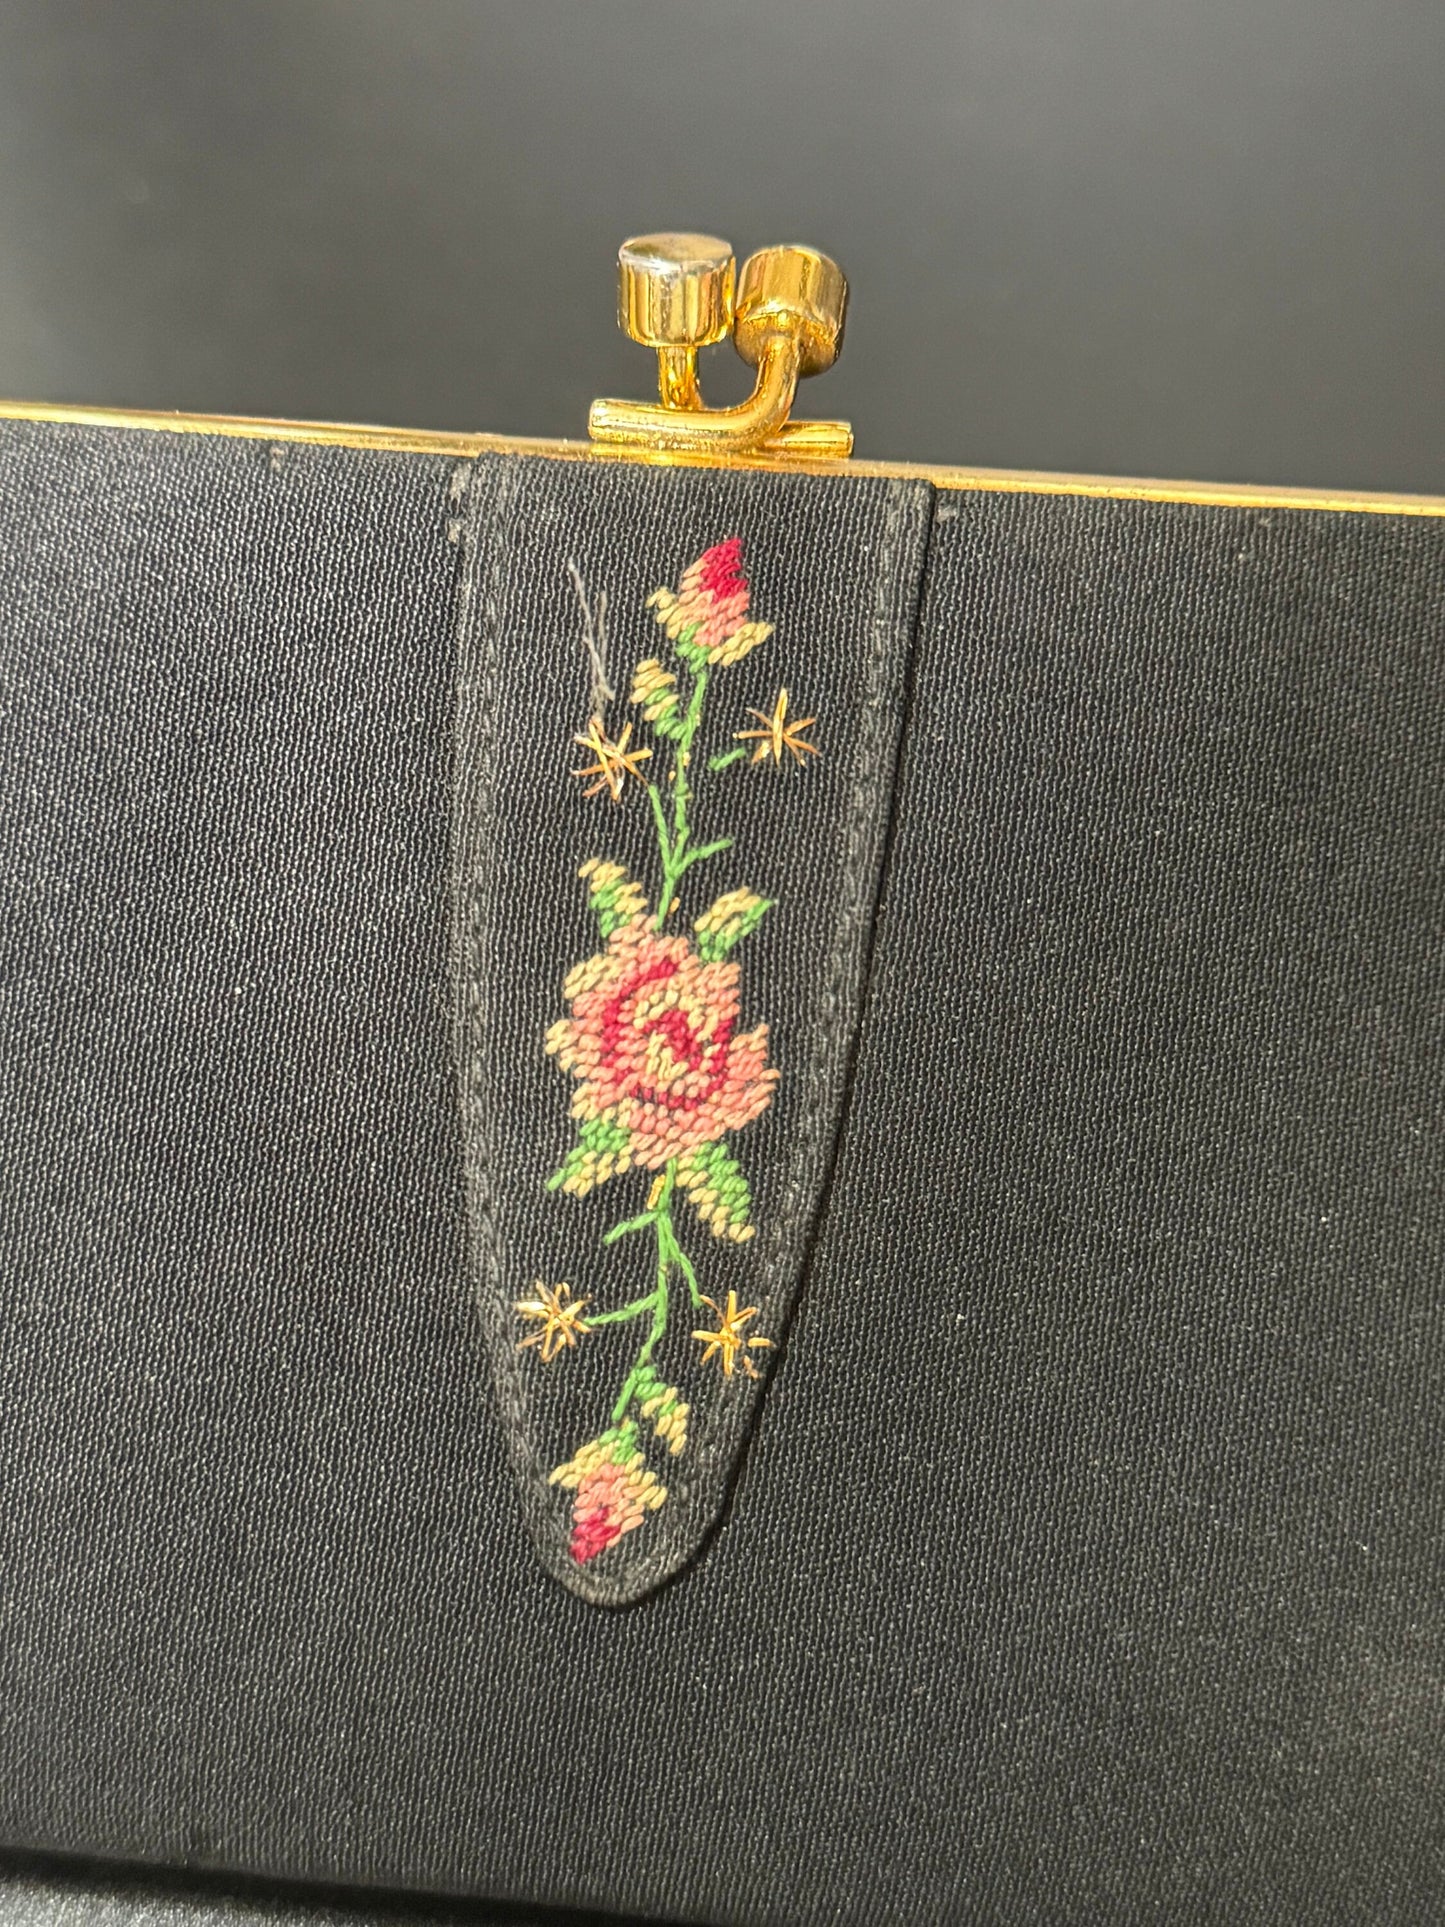 Vintage black crepe Evening Bag Purse with floral petit point embroidery mid century